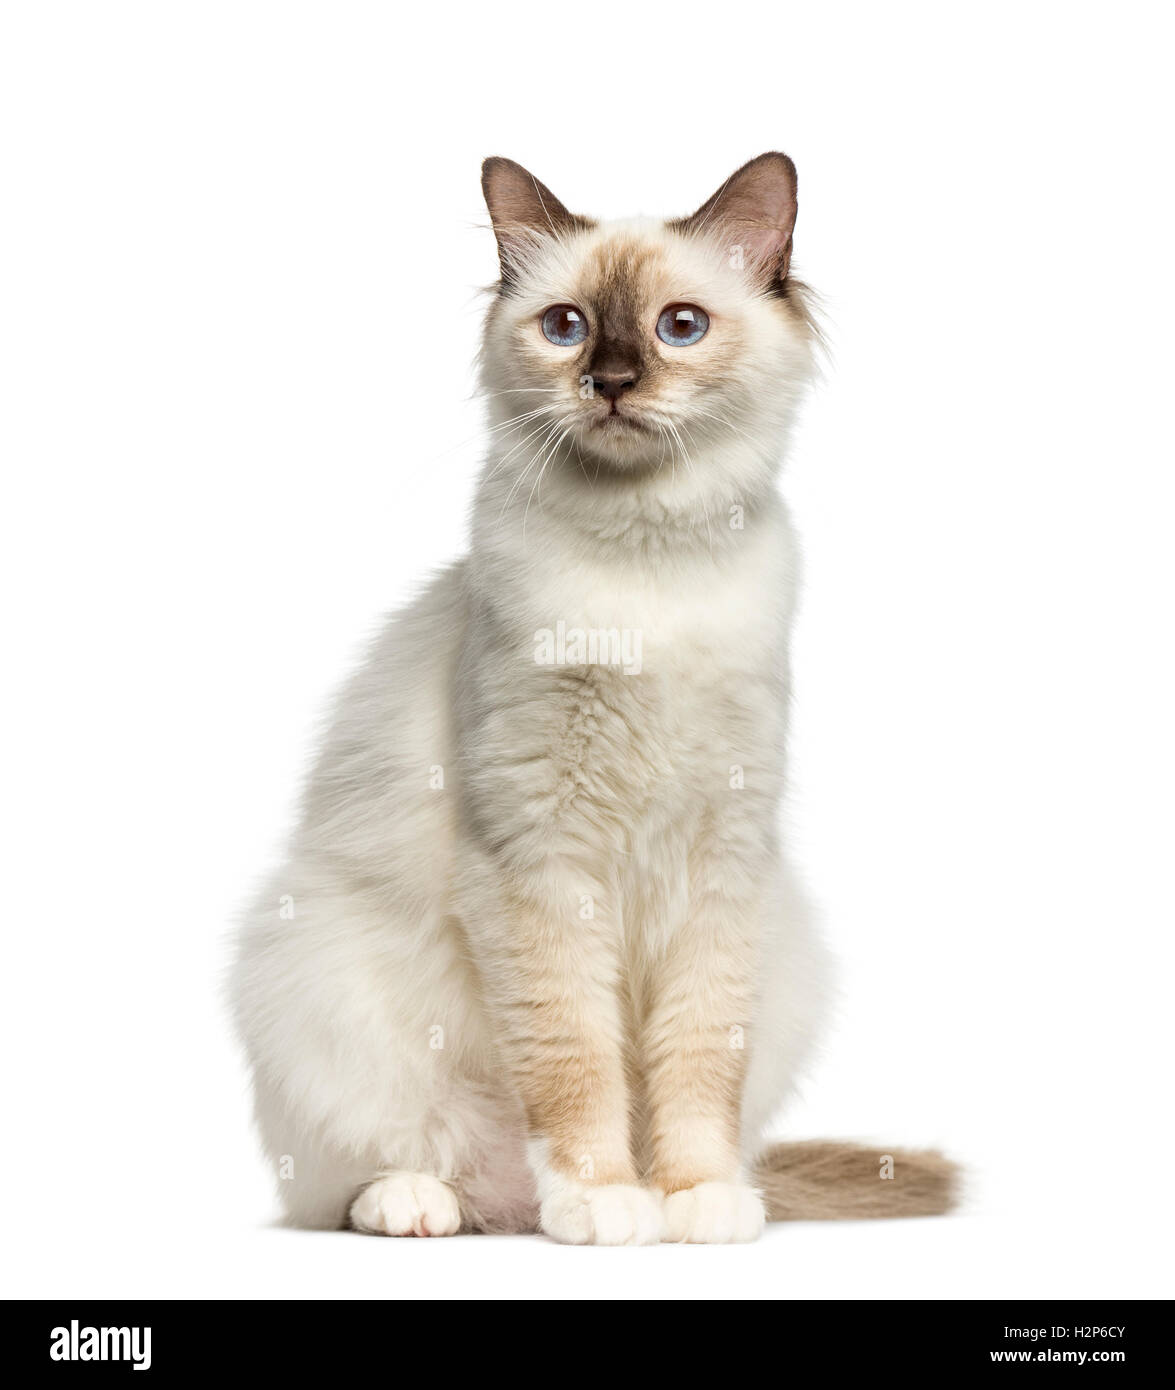 Front view of a Birman cat sitting isolated on white Stock Photo